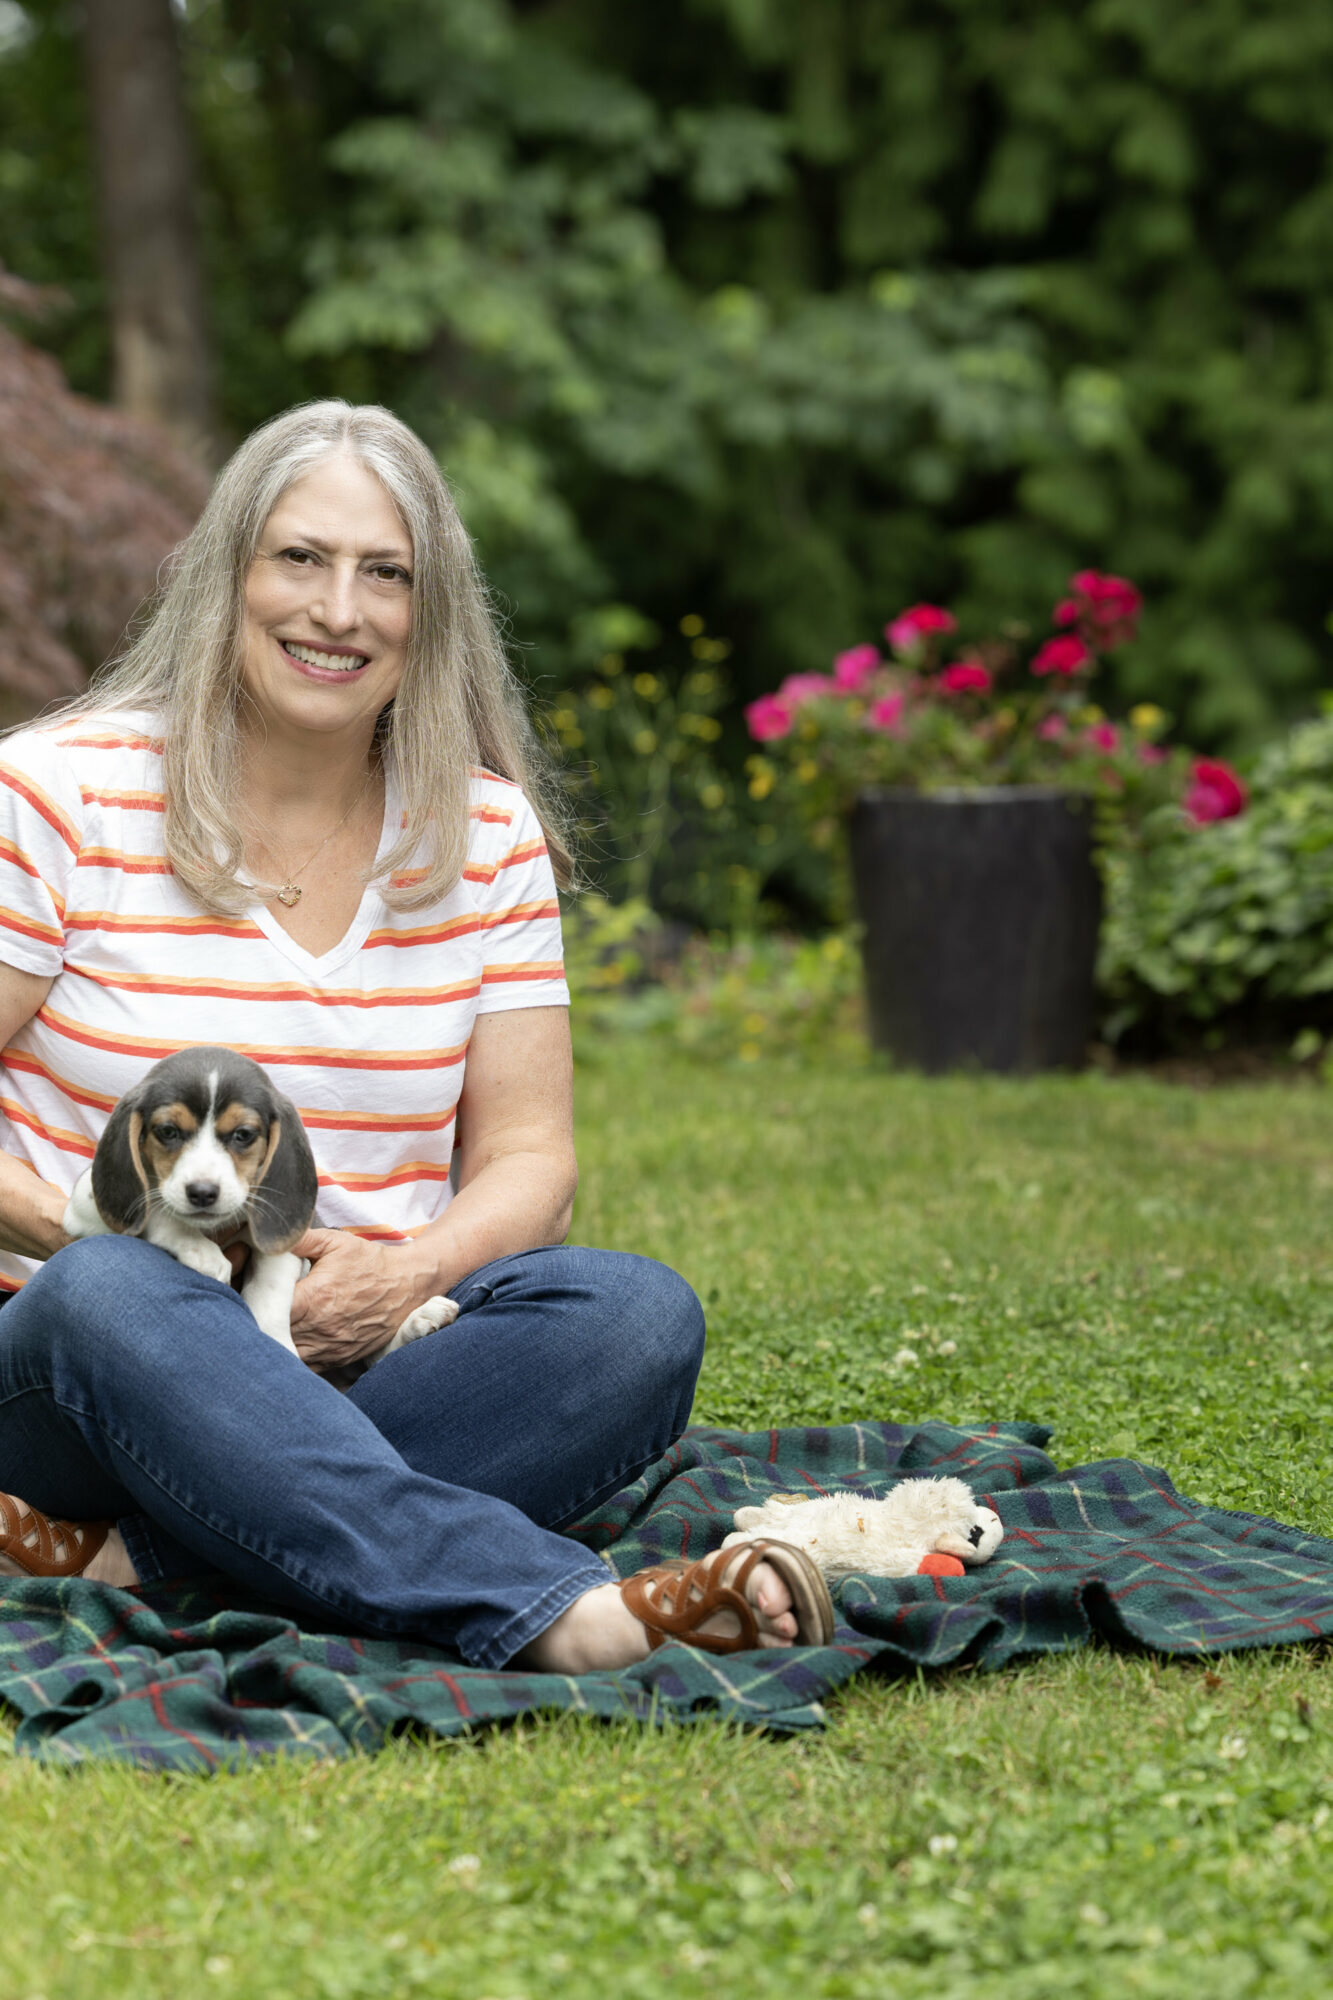 Empowered Voices member wearing a orange and white striped v-neck t-shirt and blue jeans with beagle puppy on lap on a dark green plaid blanket on grass with pink potted begonias and forested green background